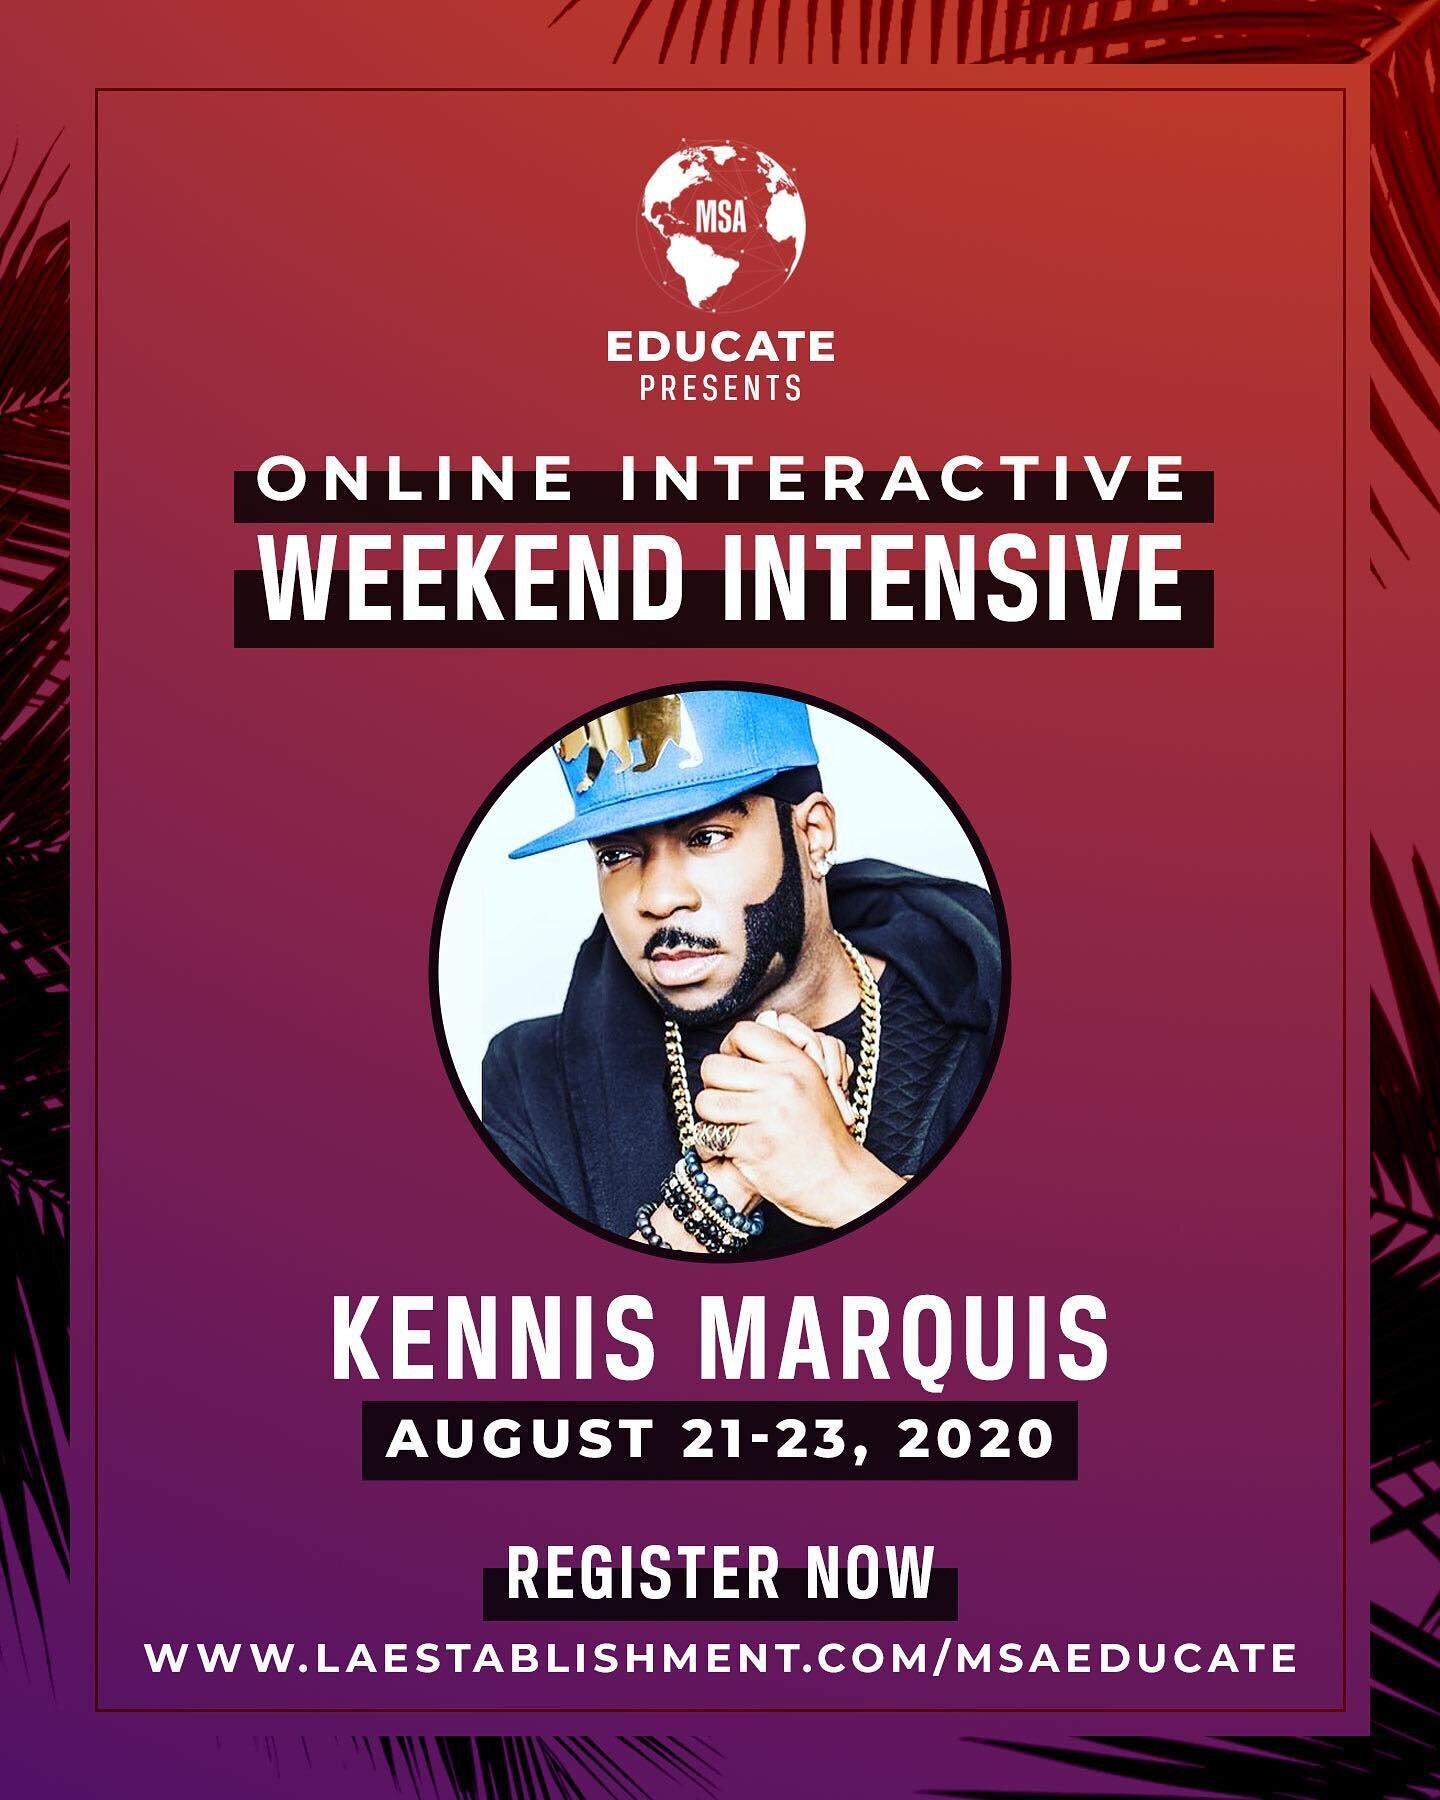 Get your GROOVE on with @kennismarquisofficial THIS WEEKEND! We can&rsquo;t wait to dance with you- go to www.laestablishment.com/msaeducate to snag your spot NOW!